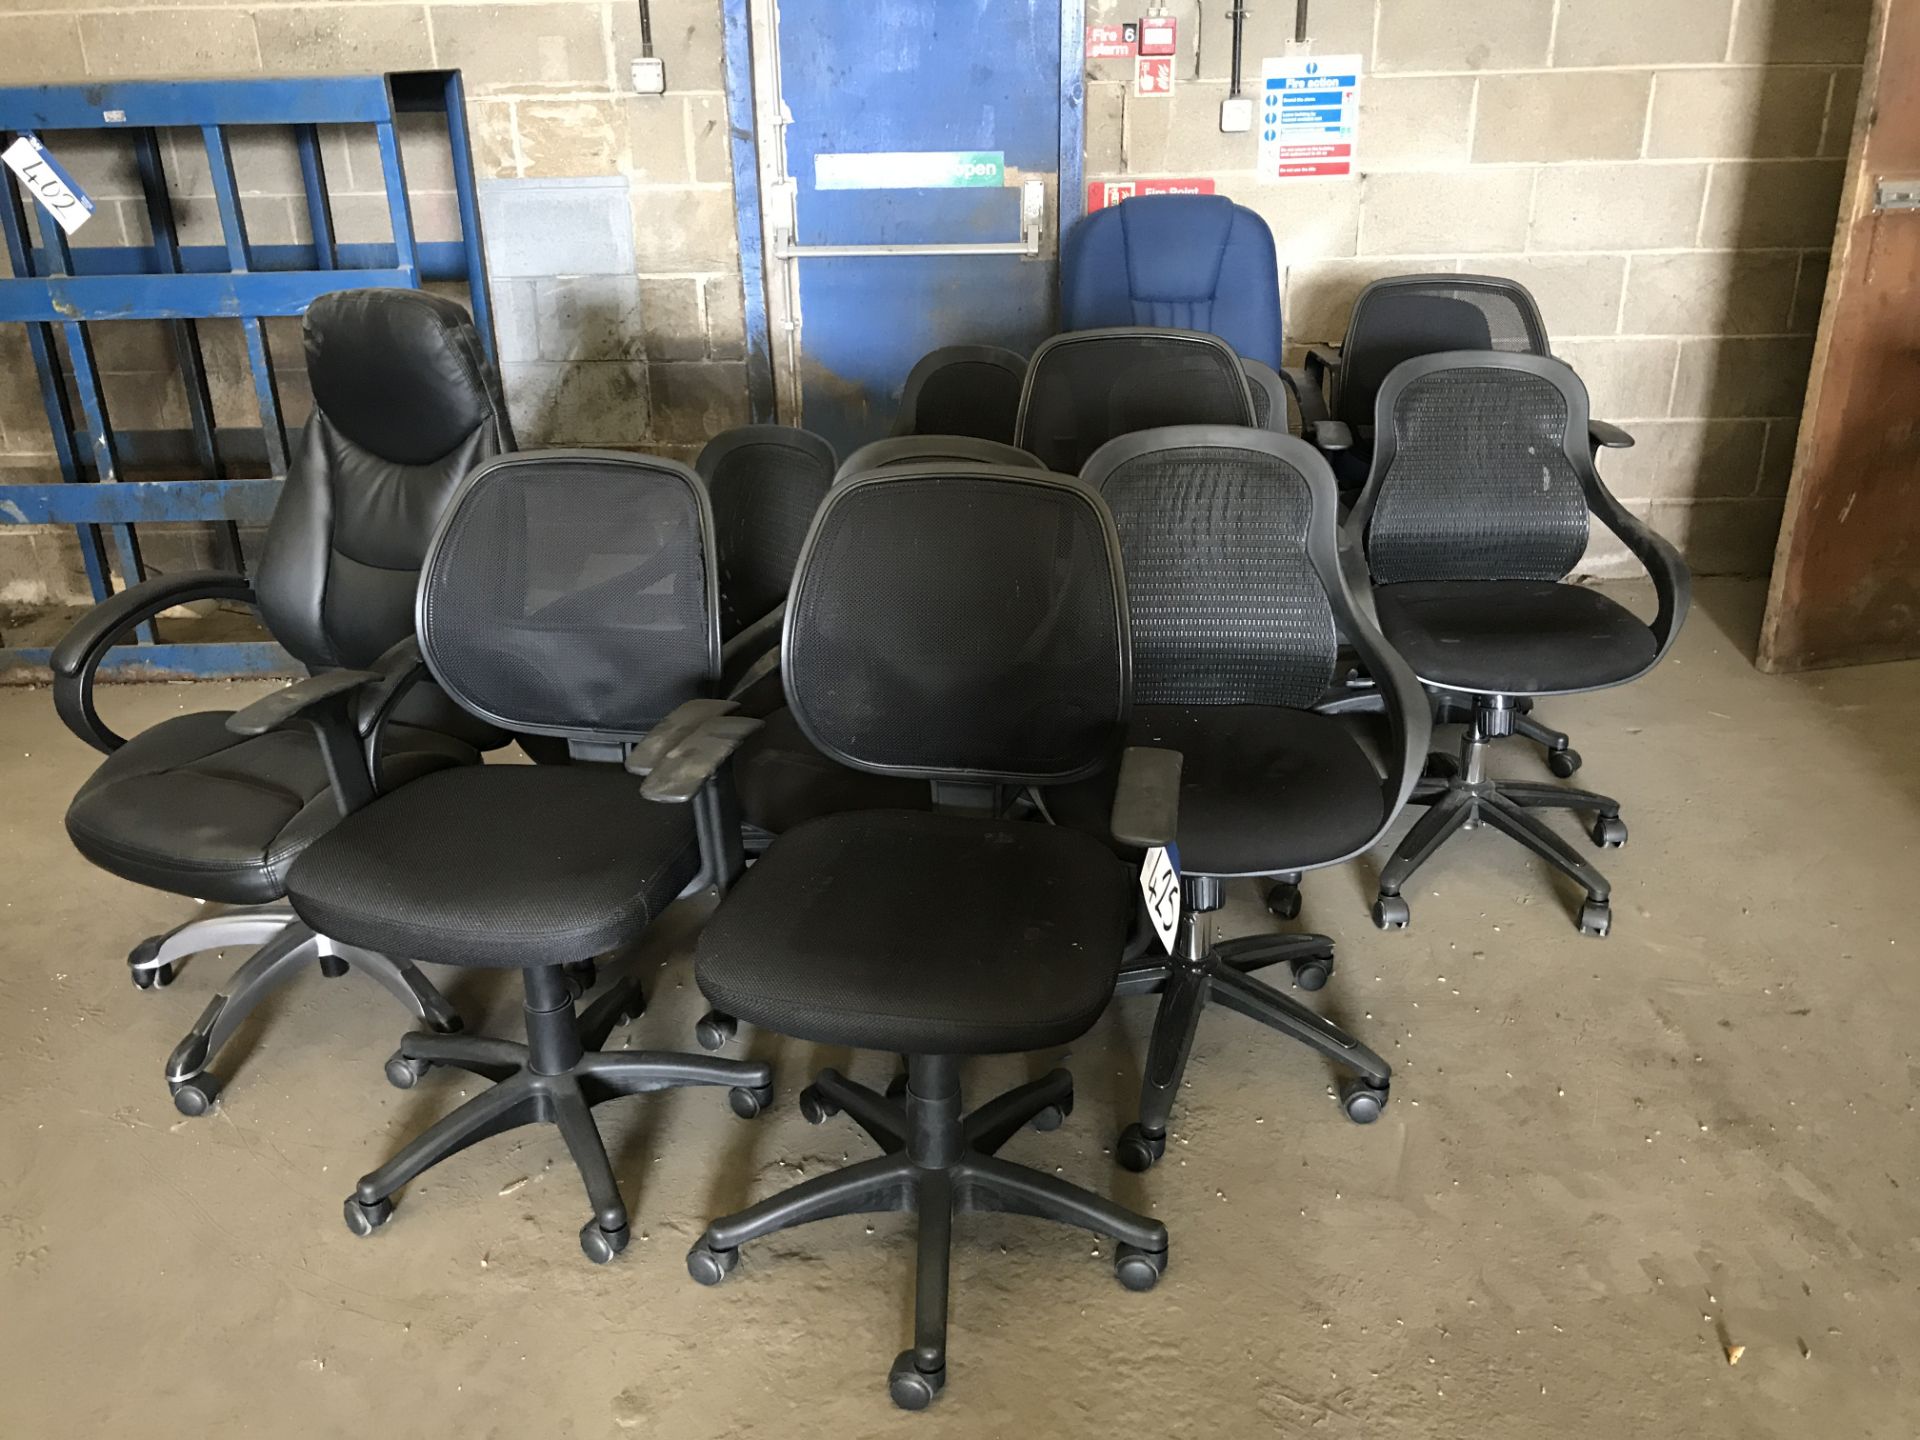 13 Swivel Armchairs (lot located at Bedfords Limited (In Administration), Pheasant Drive,